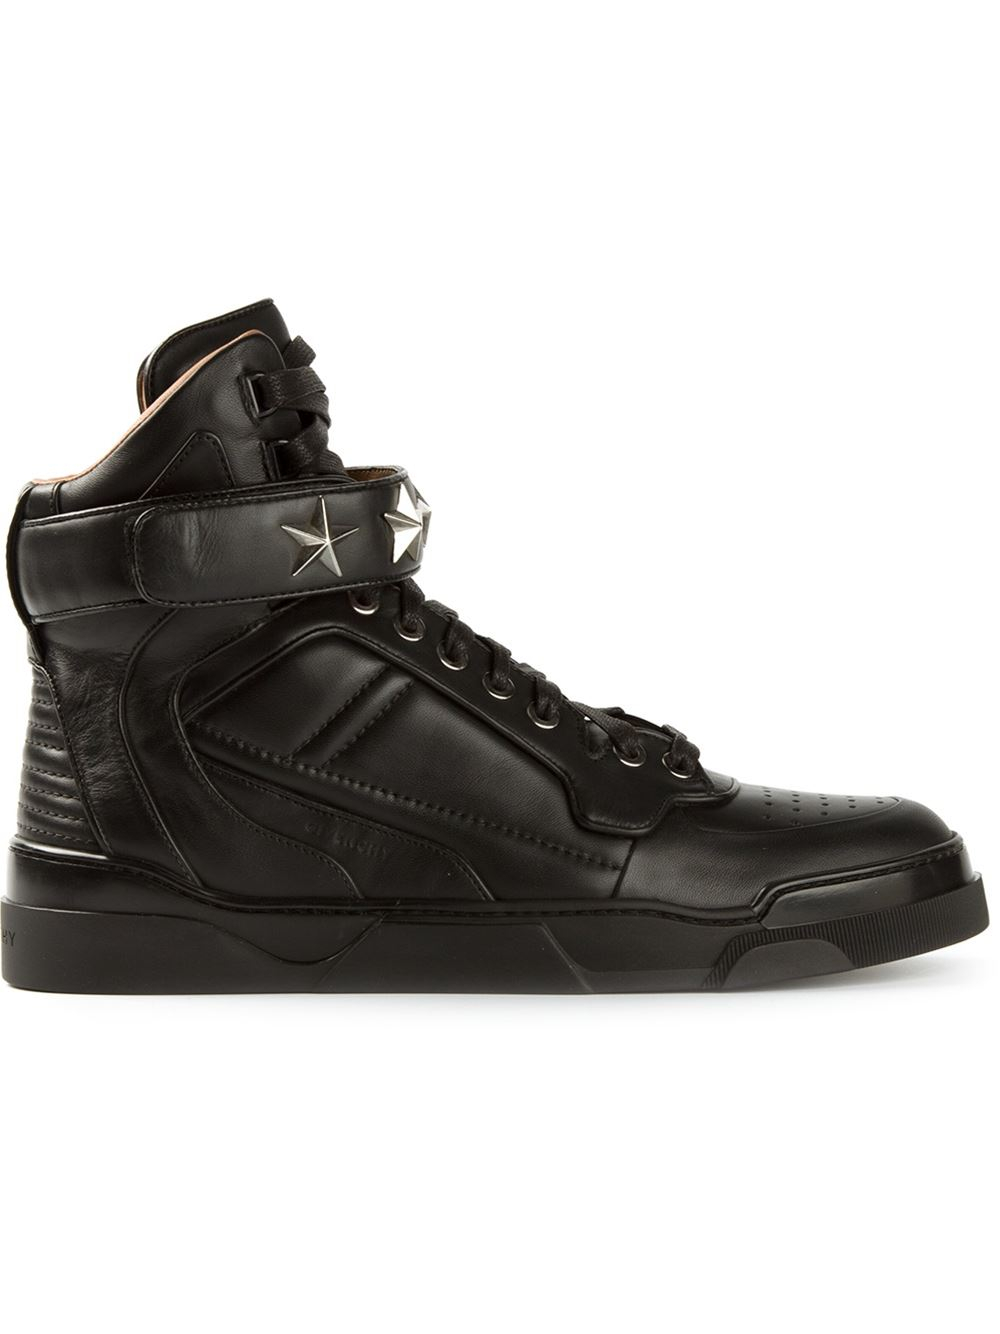 Lyst - Givenchy Hitop Embossed Star Sneakers in Black